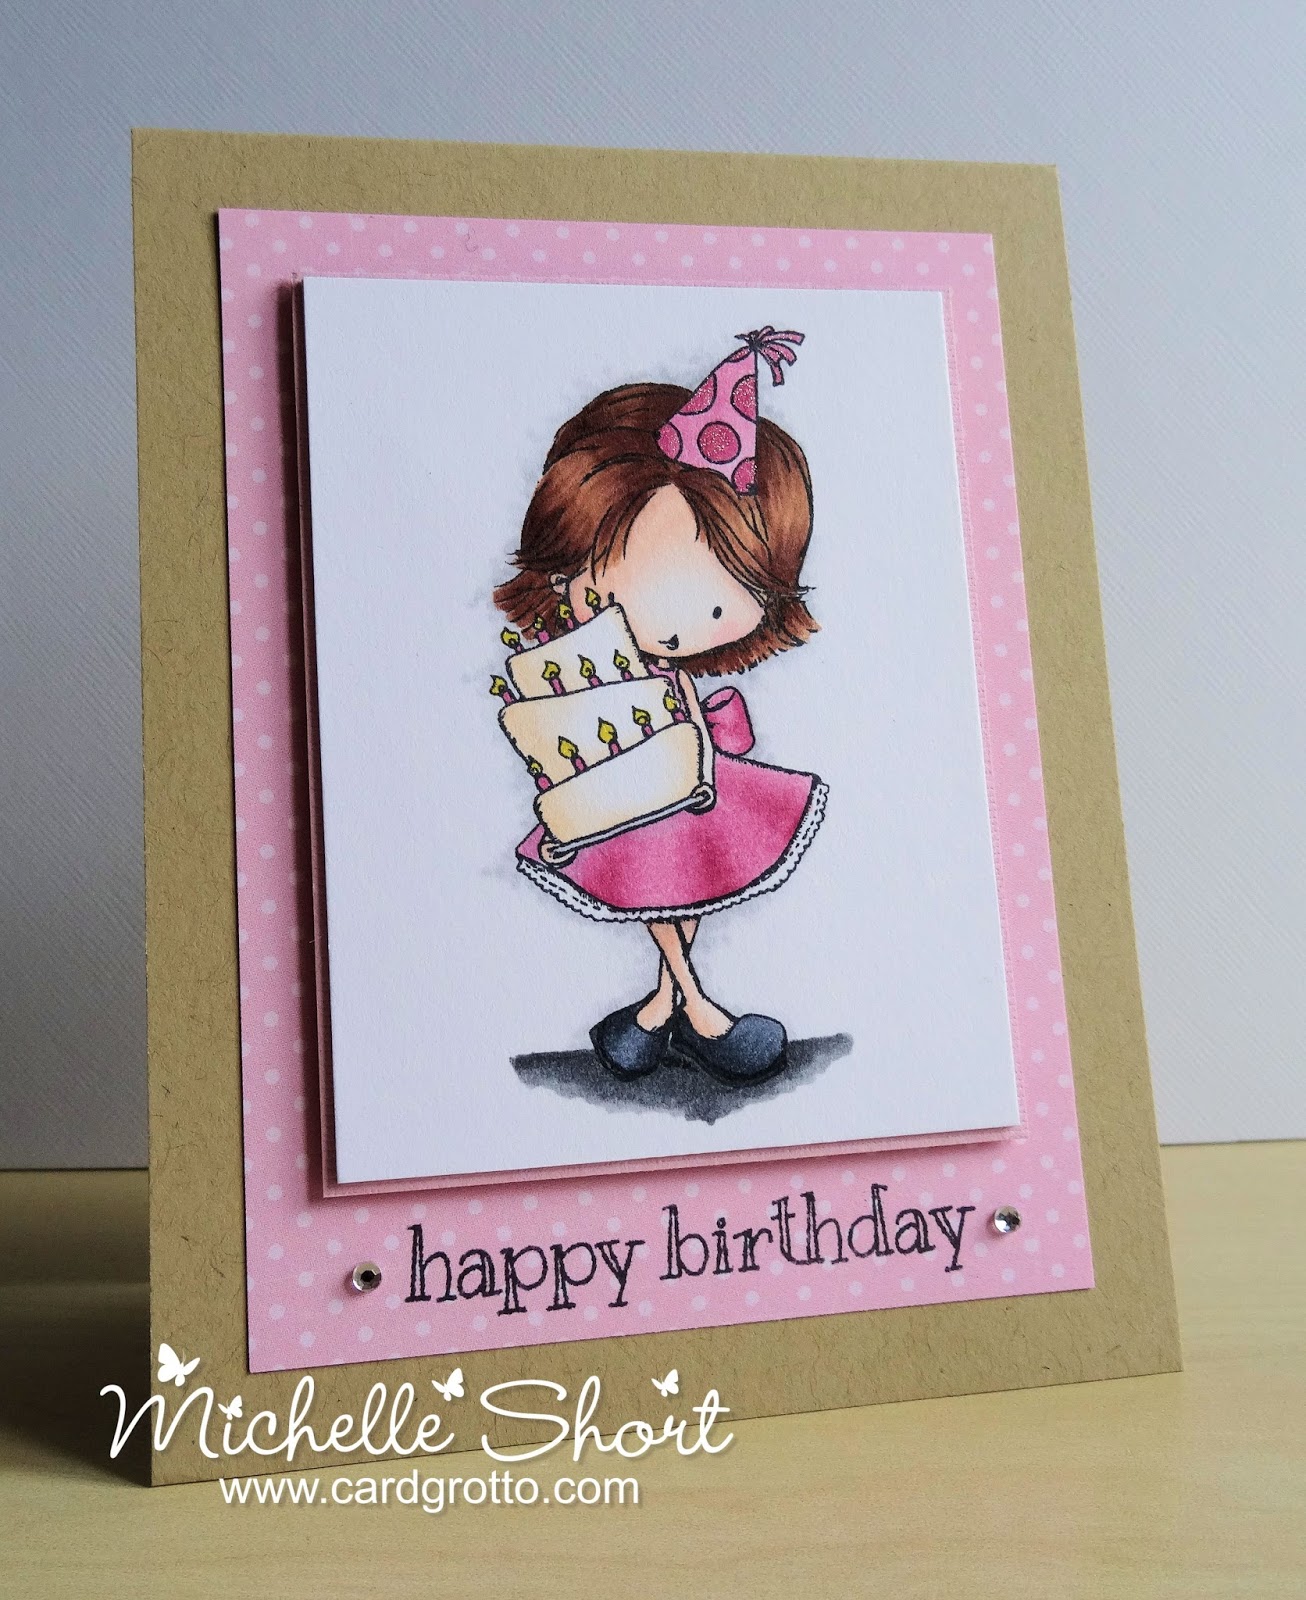 The Card Grotto: Birthday Wishes - DTDF